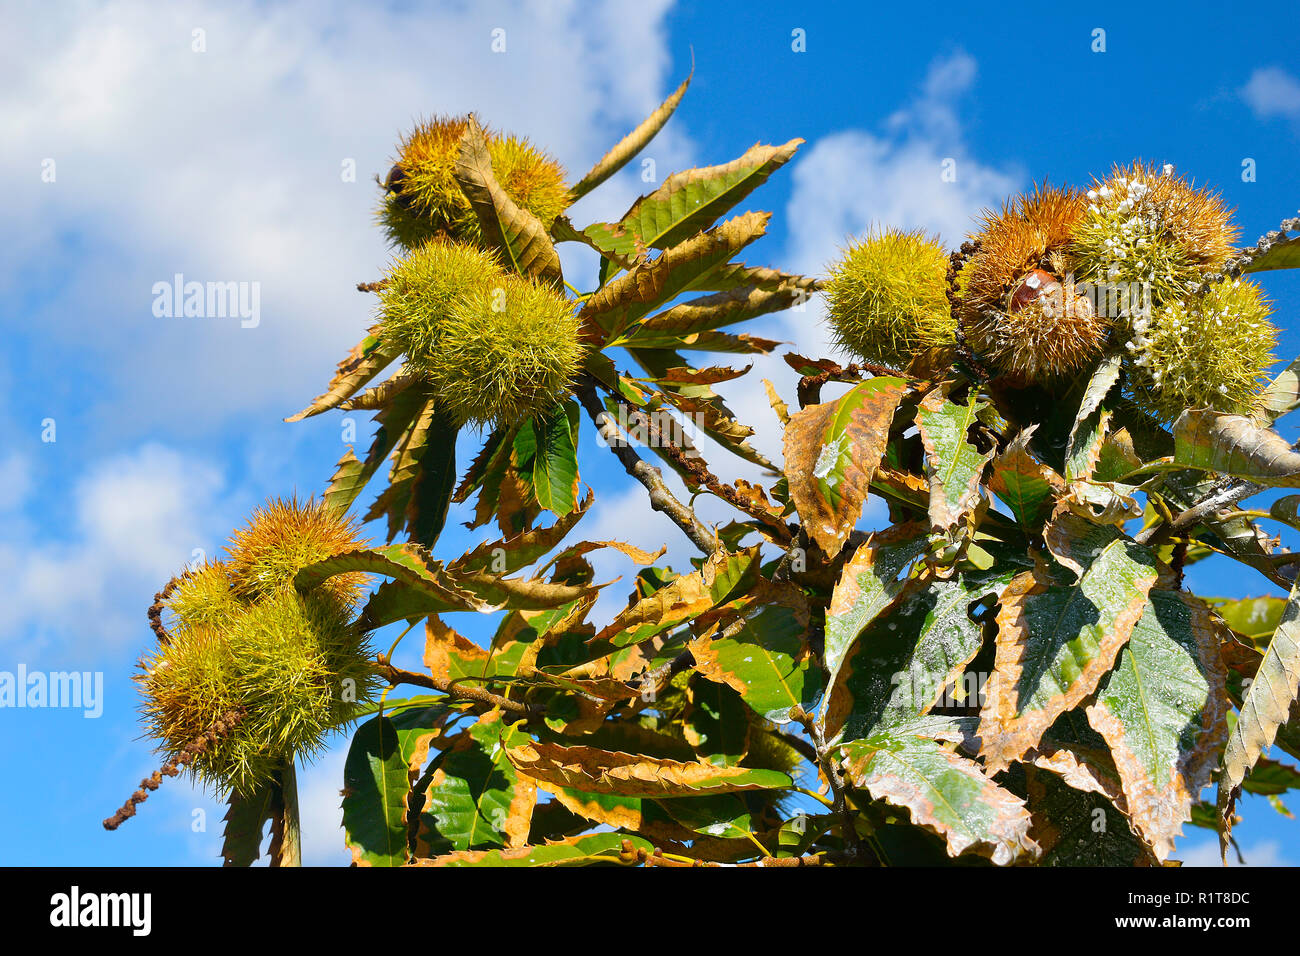 Chestnut branches with fruits or ripe chestnuts on blue sky background. Fruits and autumn foods. Medium plane. Stock Photo